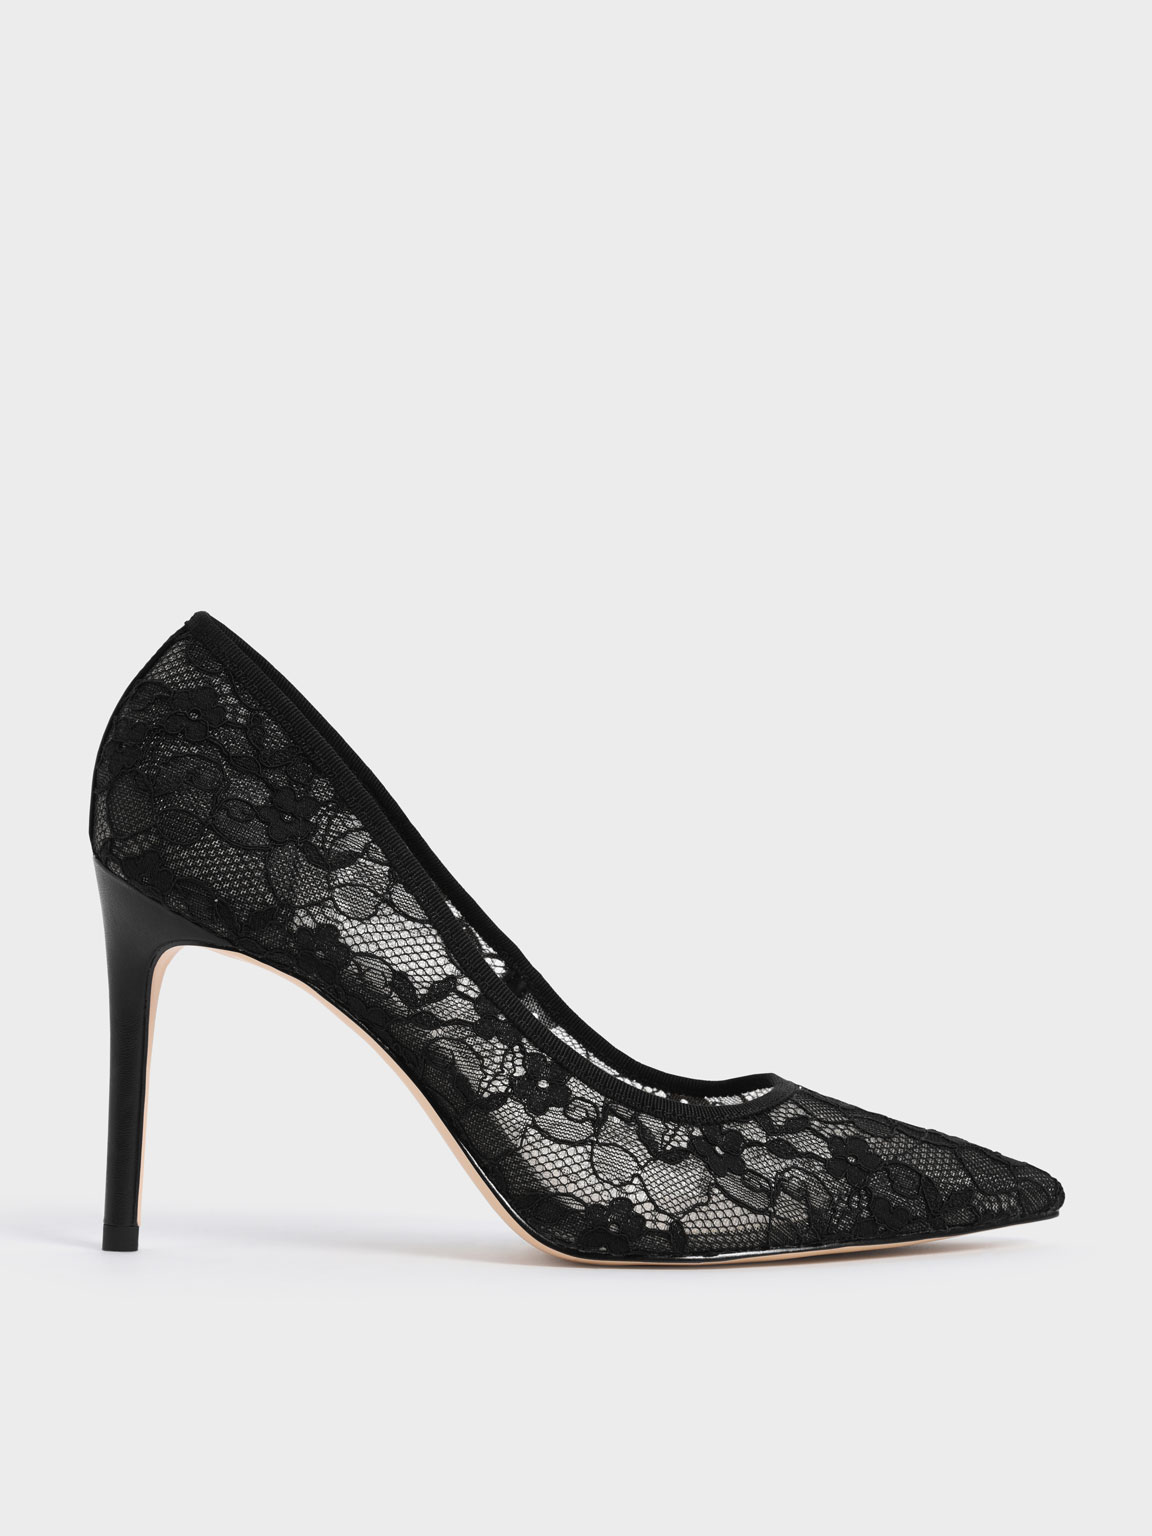 Black Lace Stiletto Pumps - CHARLES & KEITH UK